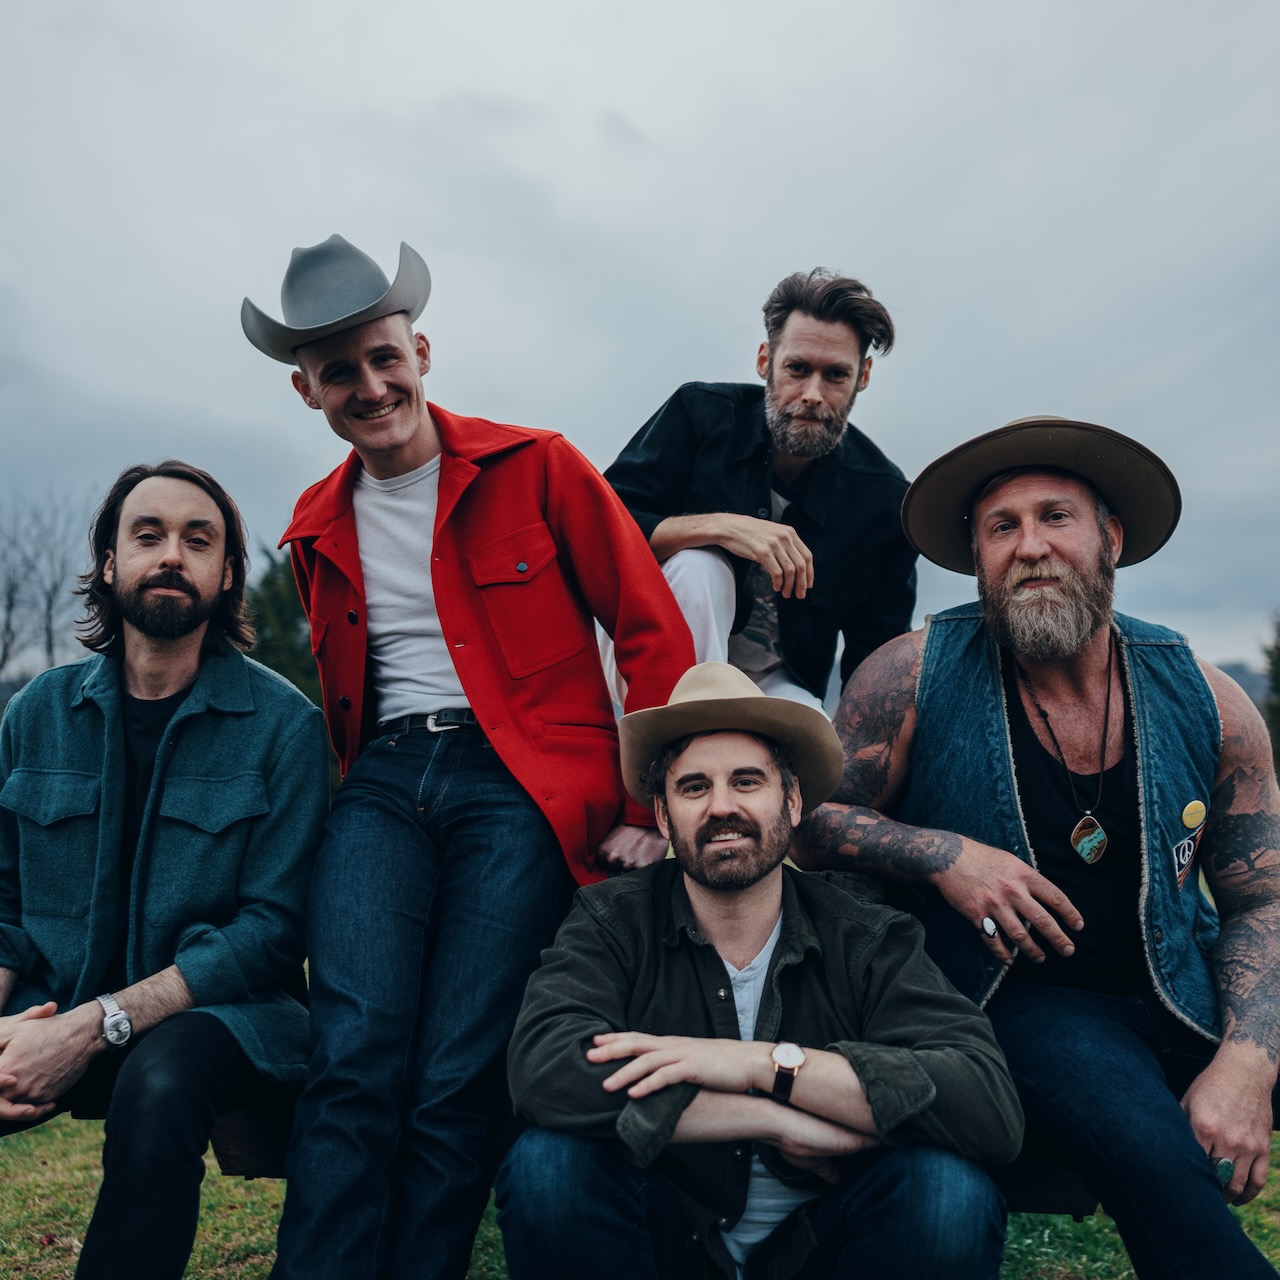 WATCH: The Dustbowl Revival, 'The Dustbowl in China: A Documentary'